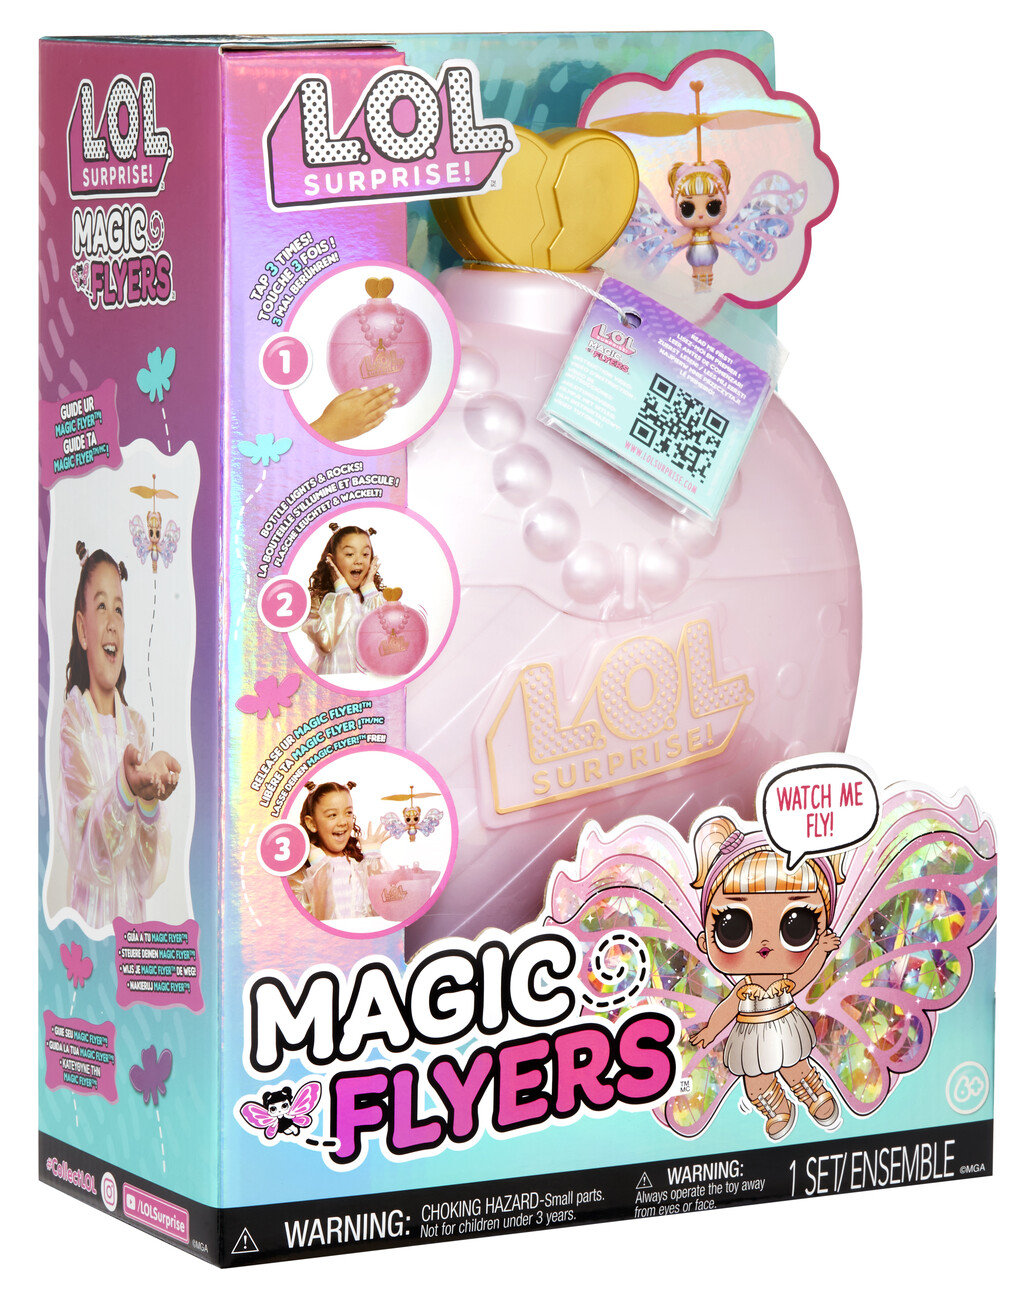 Toy L.O.L. Surprise Magic Flyers - Sky Starling (Gold Wings), Posters,  Gifts, Merchandise